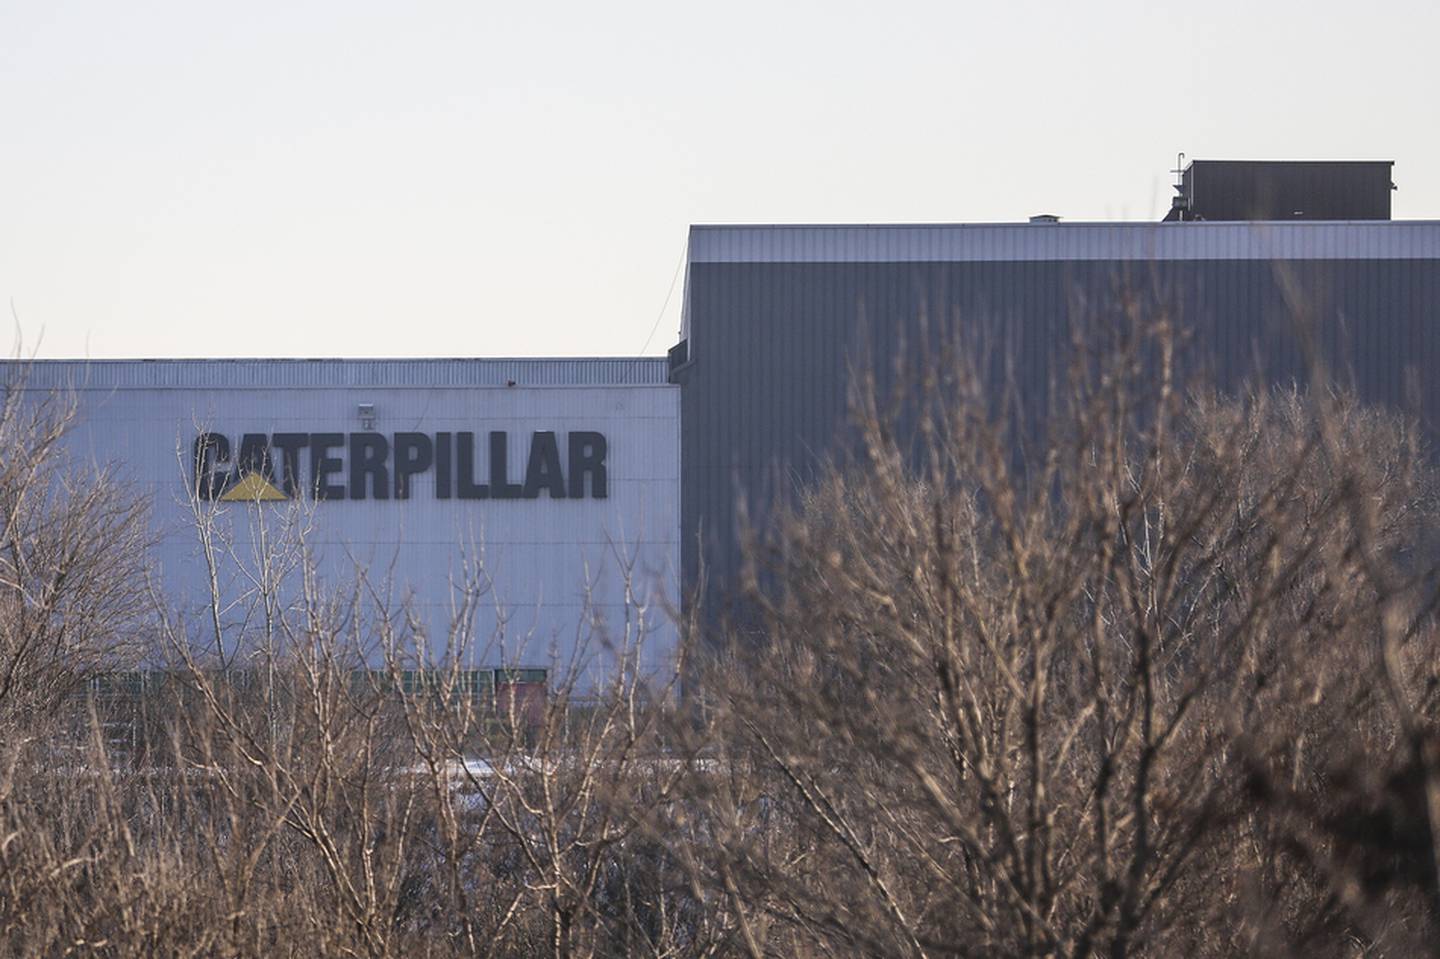 The Caterpillar plant Jan. 15 in Joliet. The company announced Thursday it plans to cut more than 10,000 jobs through 2018.